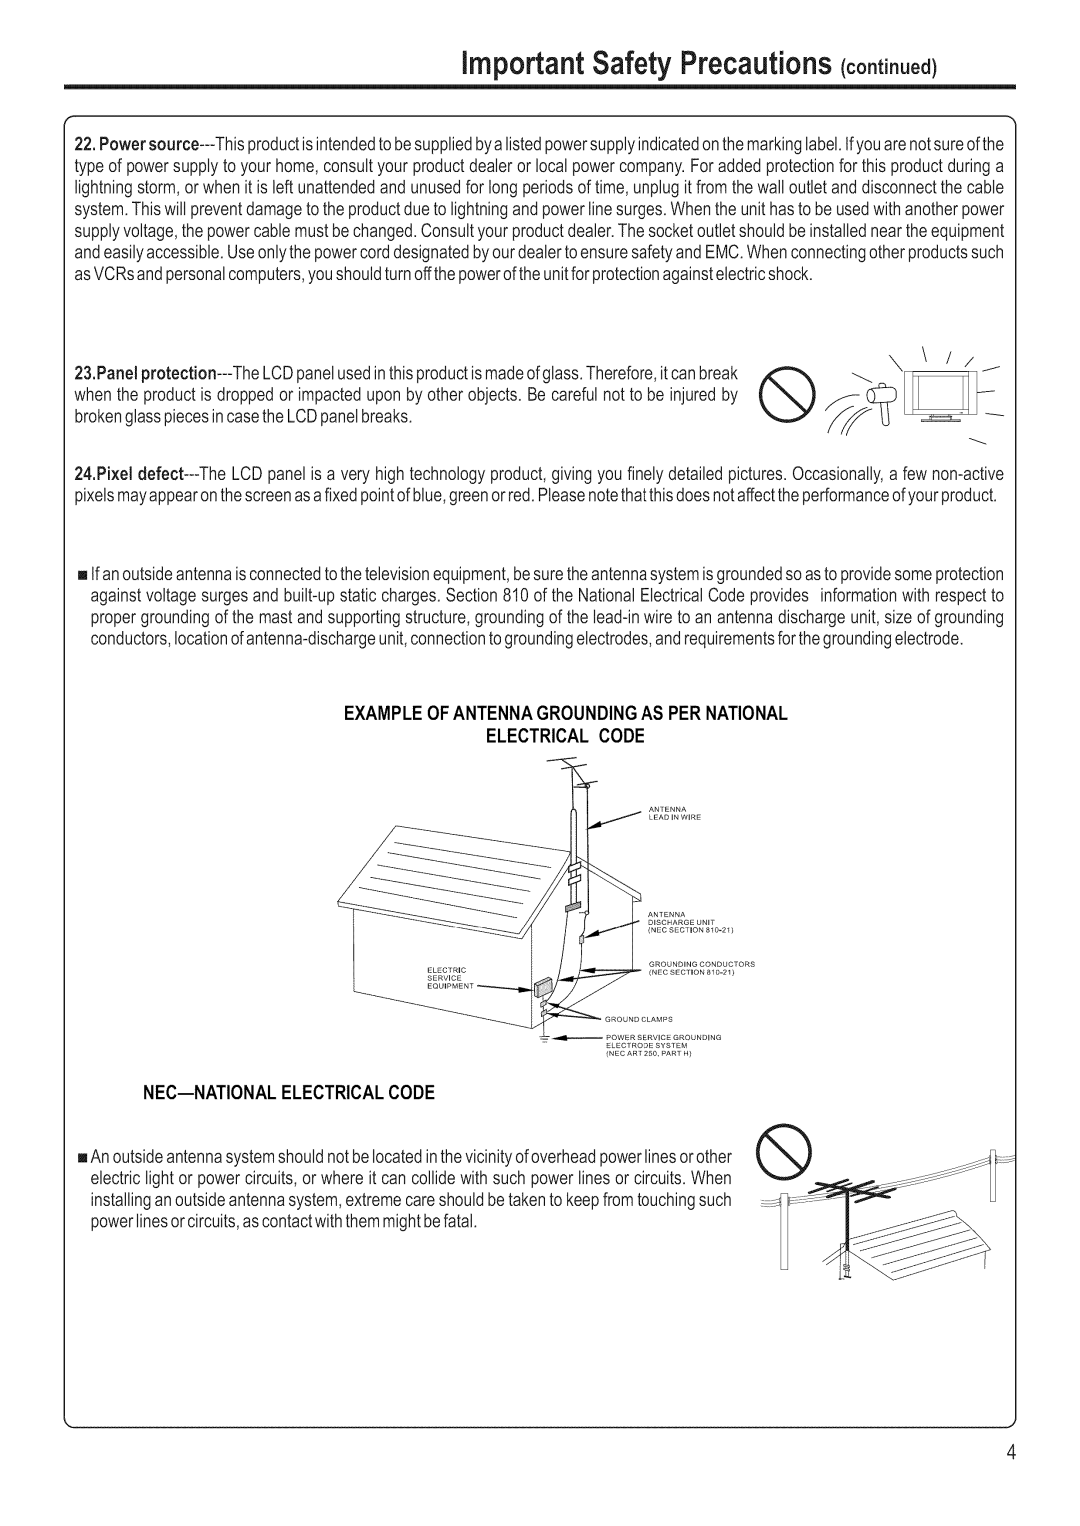 Polaroid FLM-3201 manual importantSafetyPrecautions, Example Of Antenna Grounding As Per National Electrical Code 